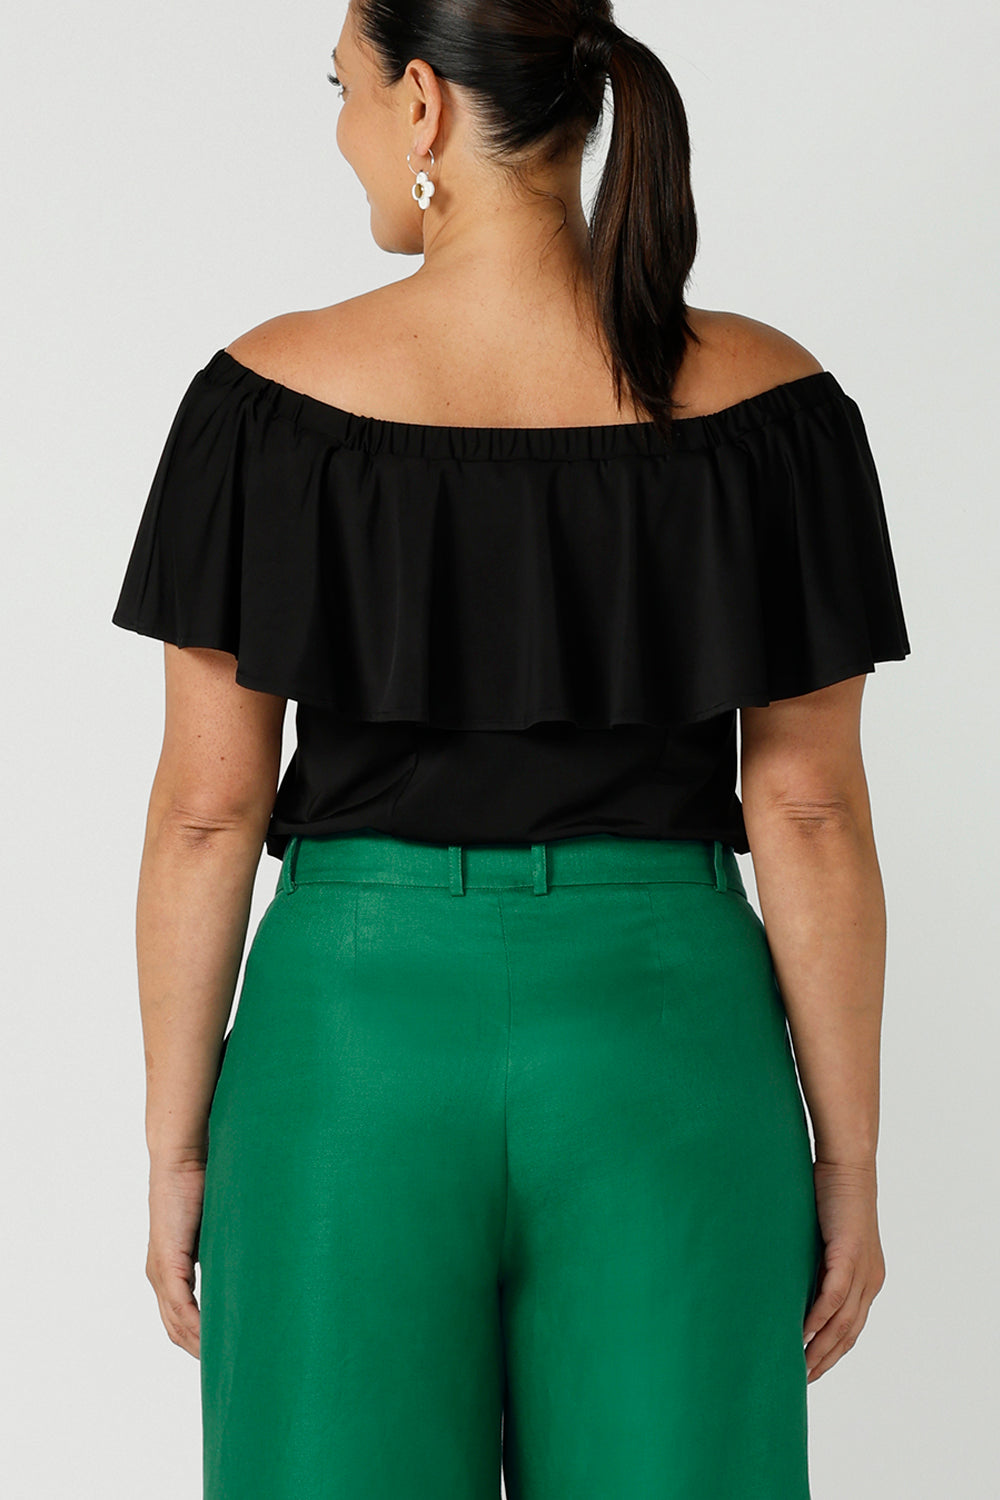 Back view size 12 woman wears an off shoulder ruffle Briar top in black. A versatile top that can be worn off or on shoulder 3 ways. Worn with emerald green linen tailore pants. Great for summer. Designed and made in Australia sizes 8-24.